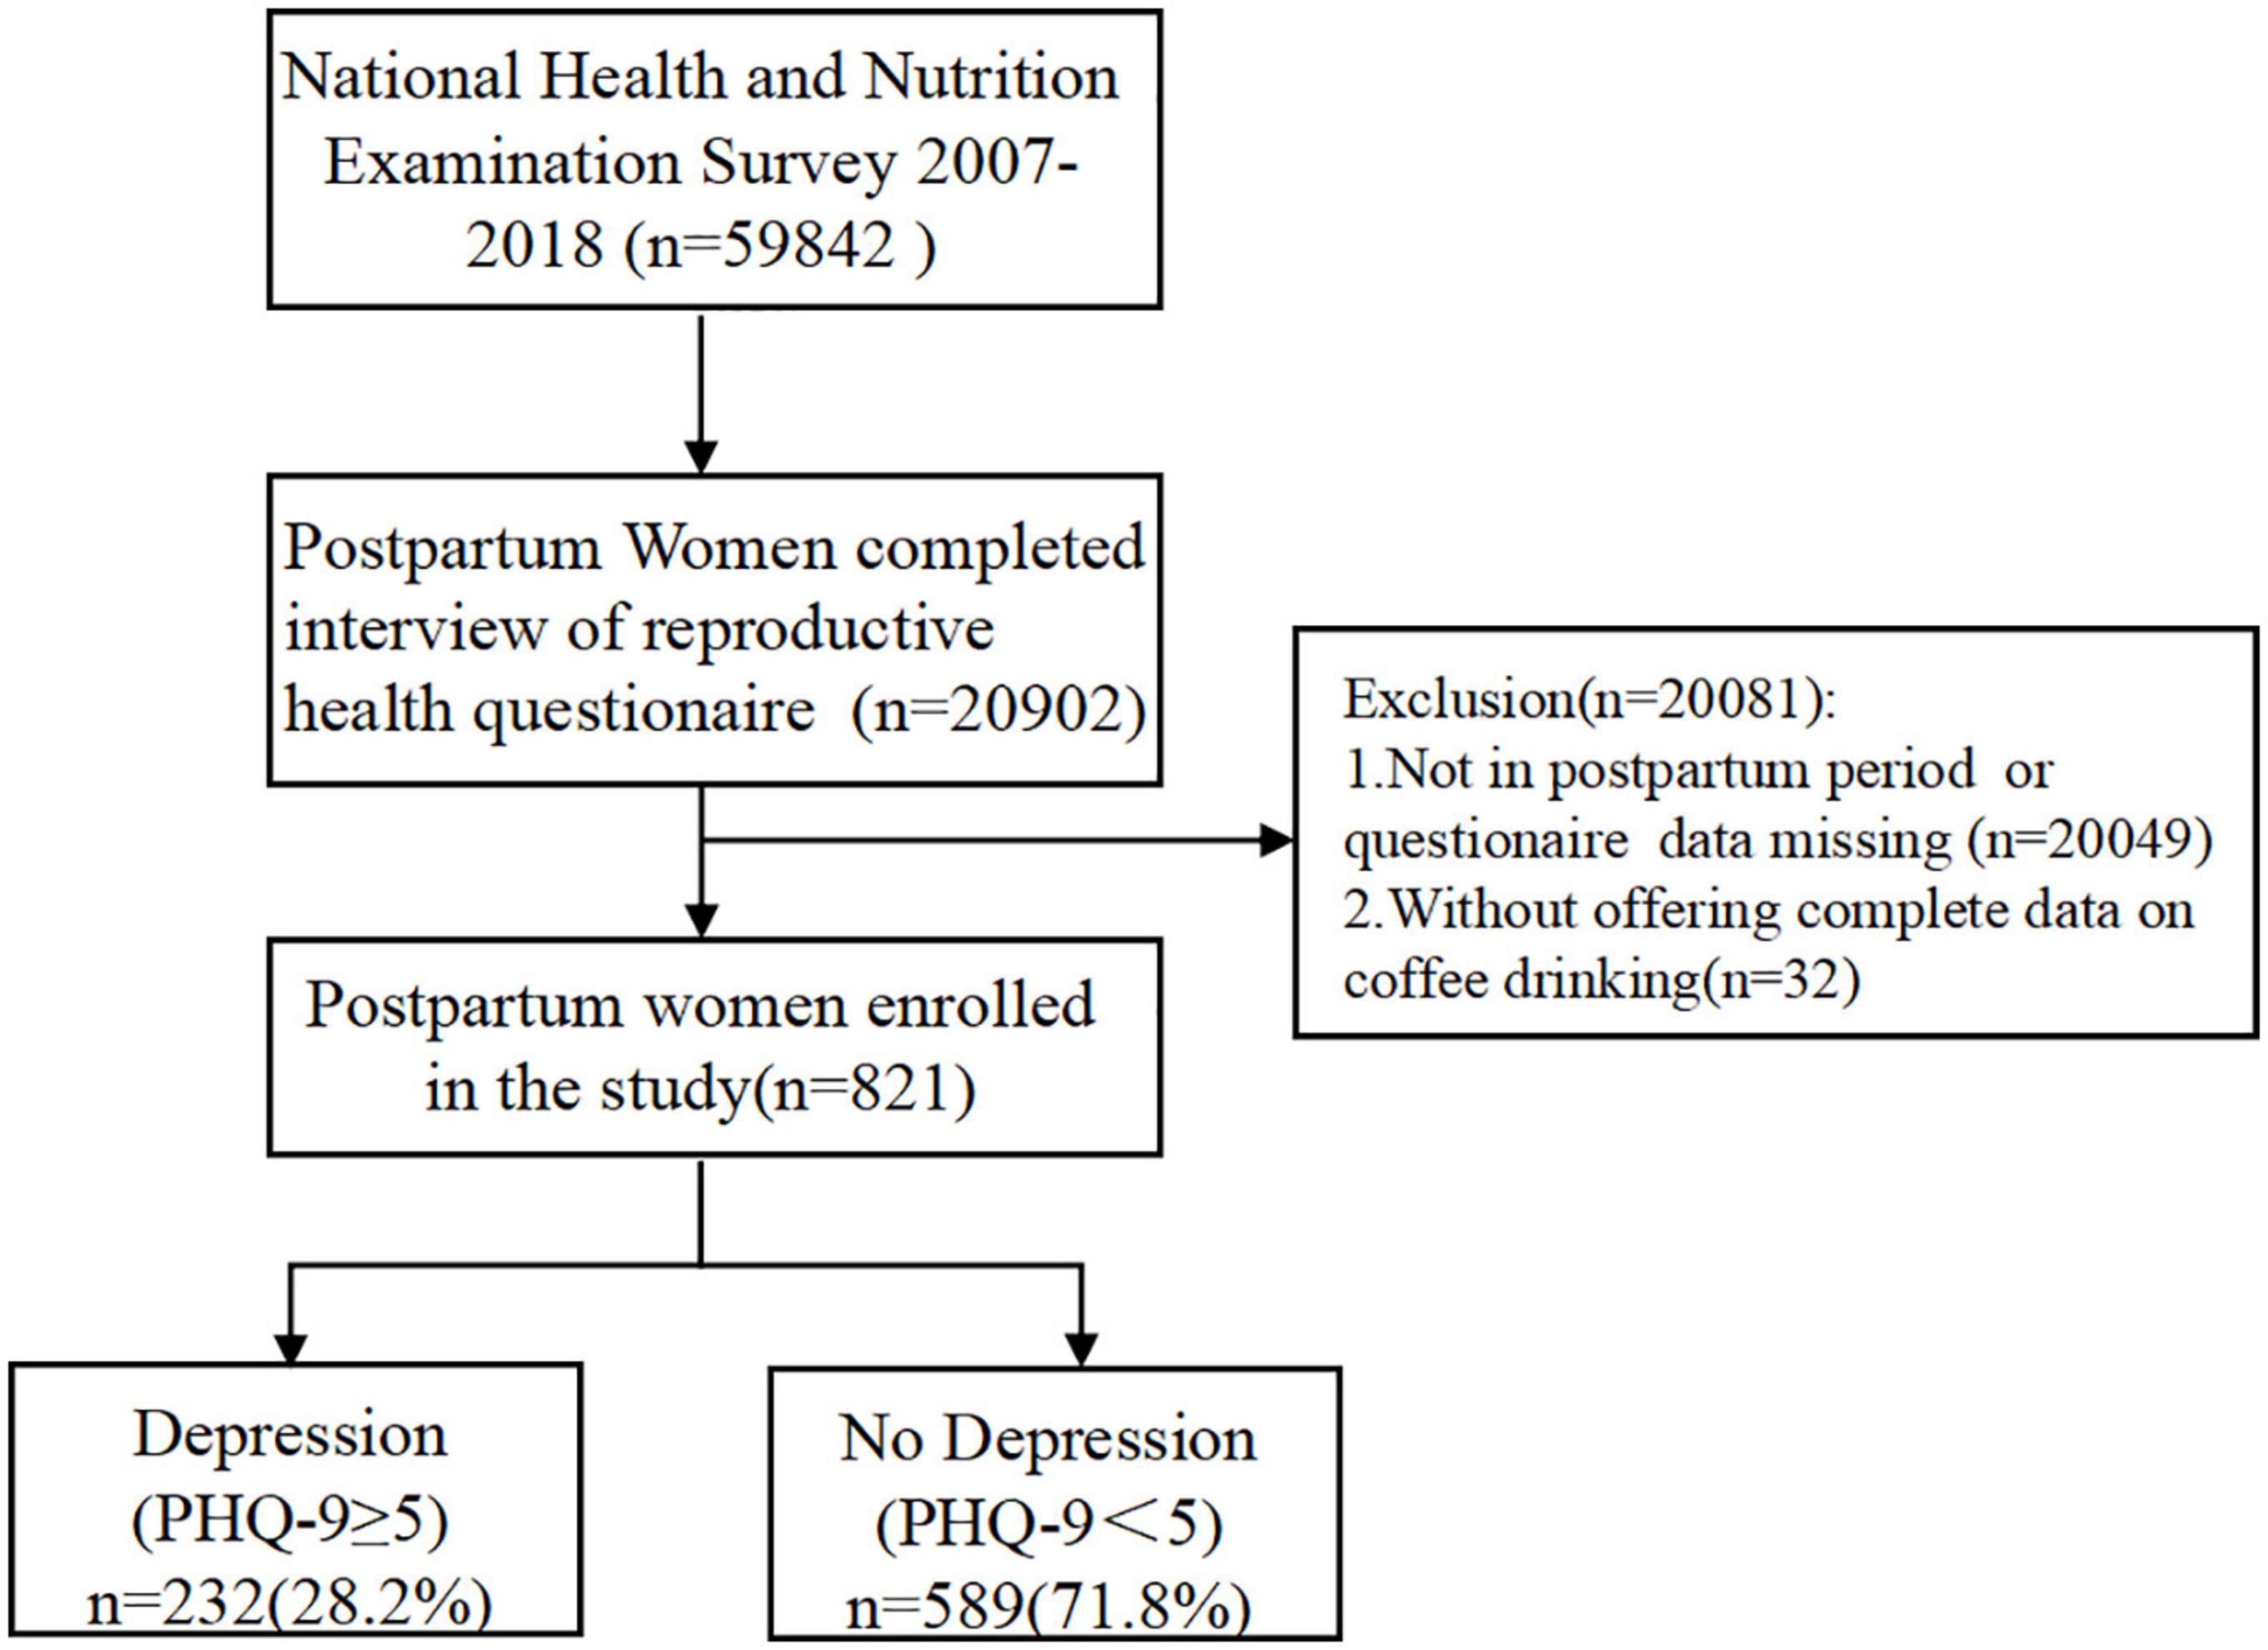 Coffee and caffeine intake and depression in postpartum women: A cross-sectional study from the National Health and Nutrition Examination Survey 2007–2018